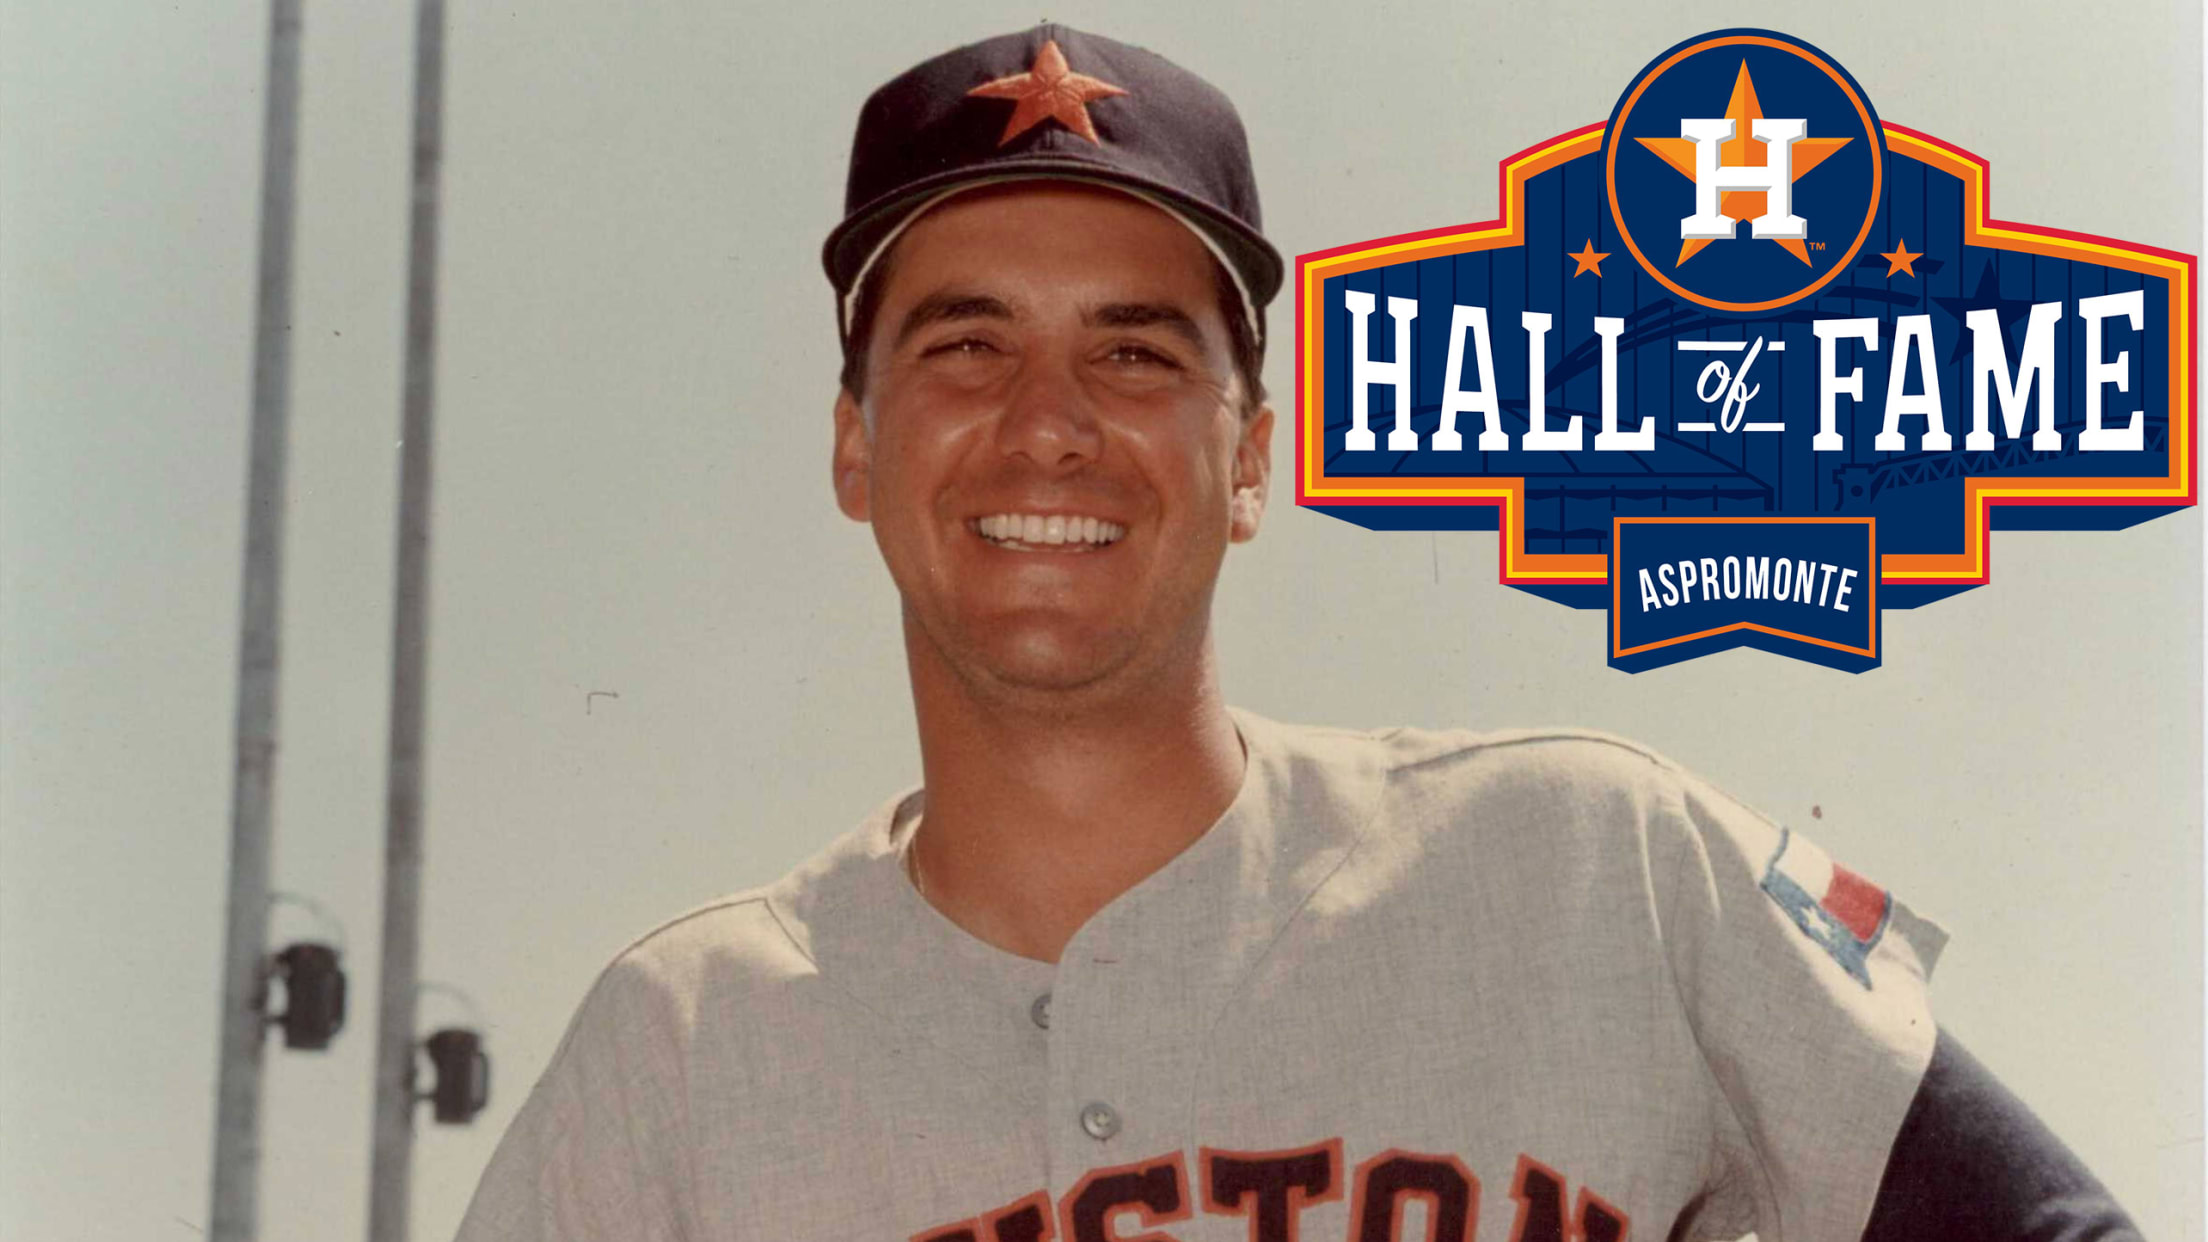 UHV's Puhl selected to Houston Astros Hall of Fame